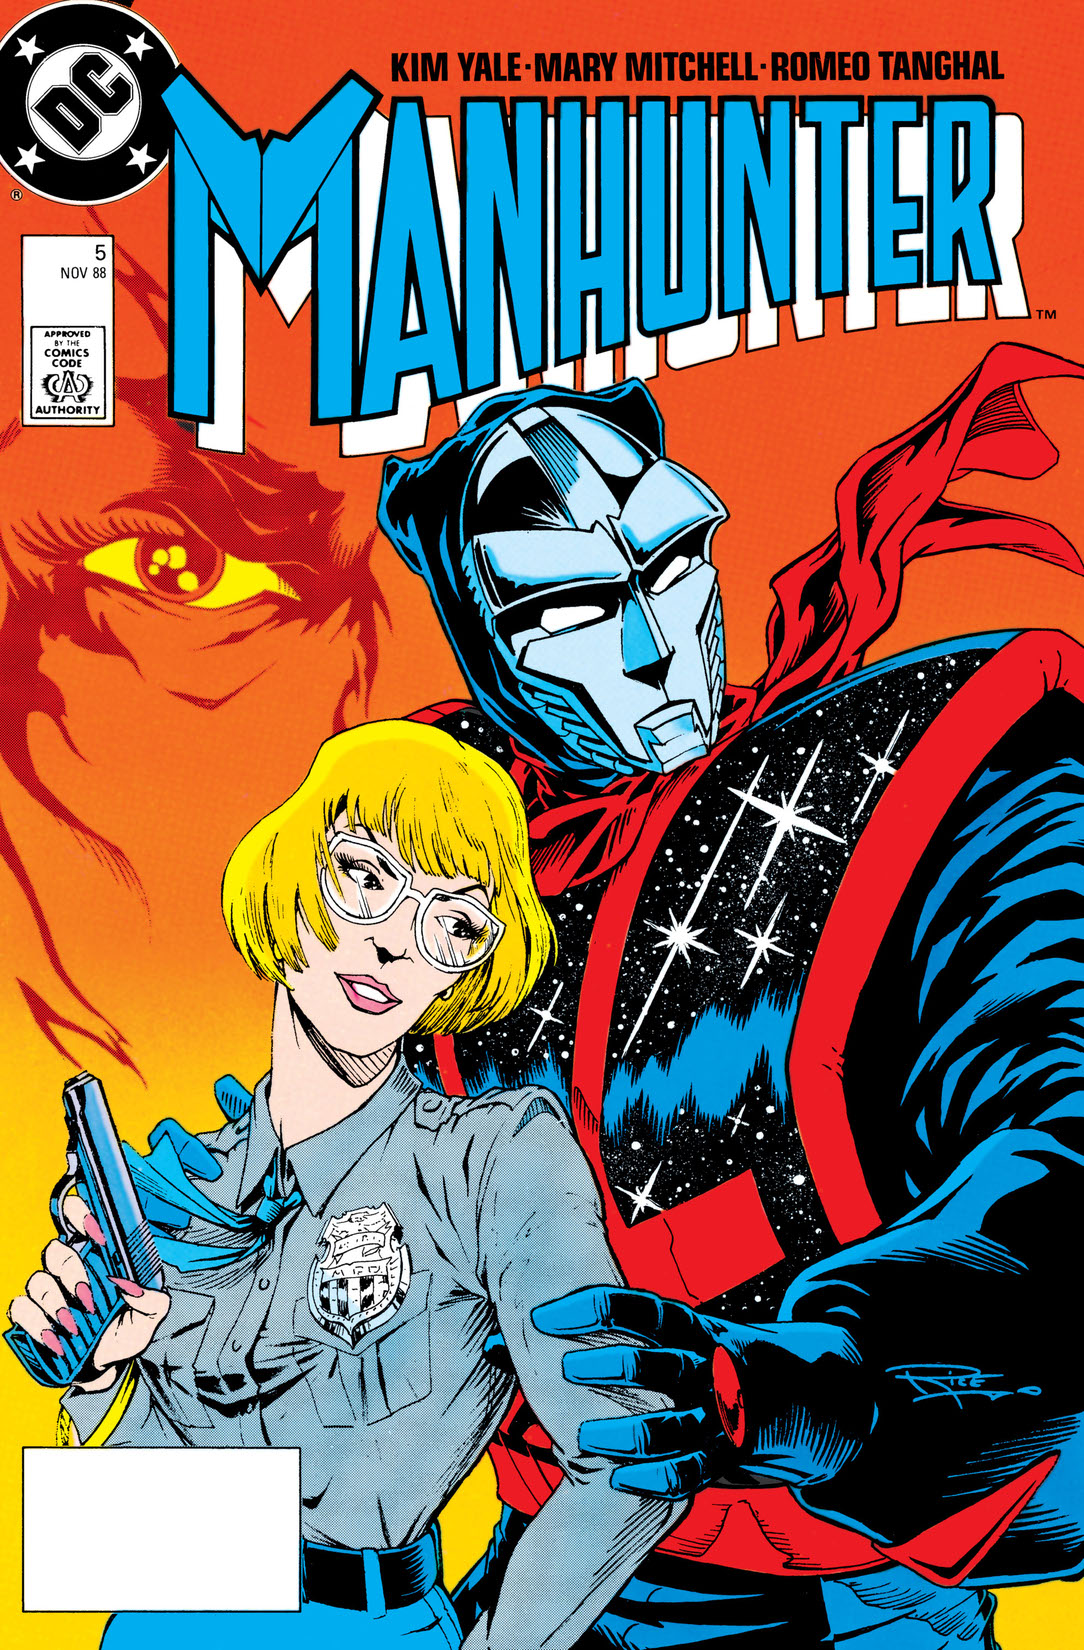 Manhunter (1988-) #5 preview images